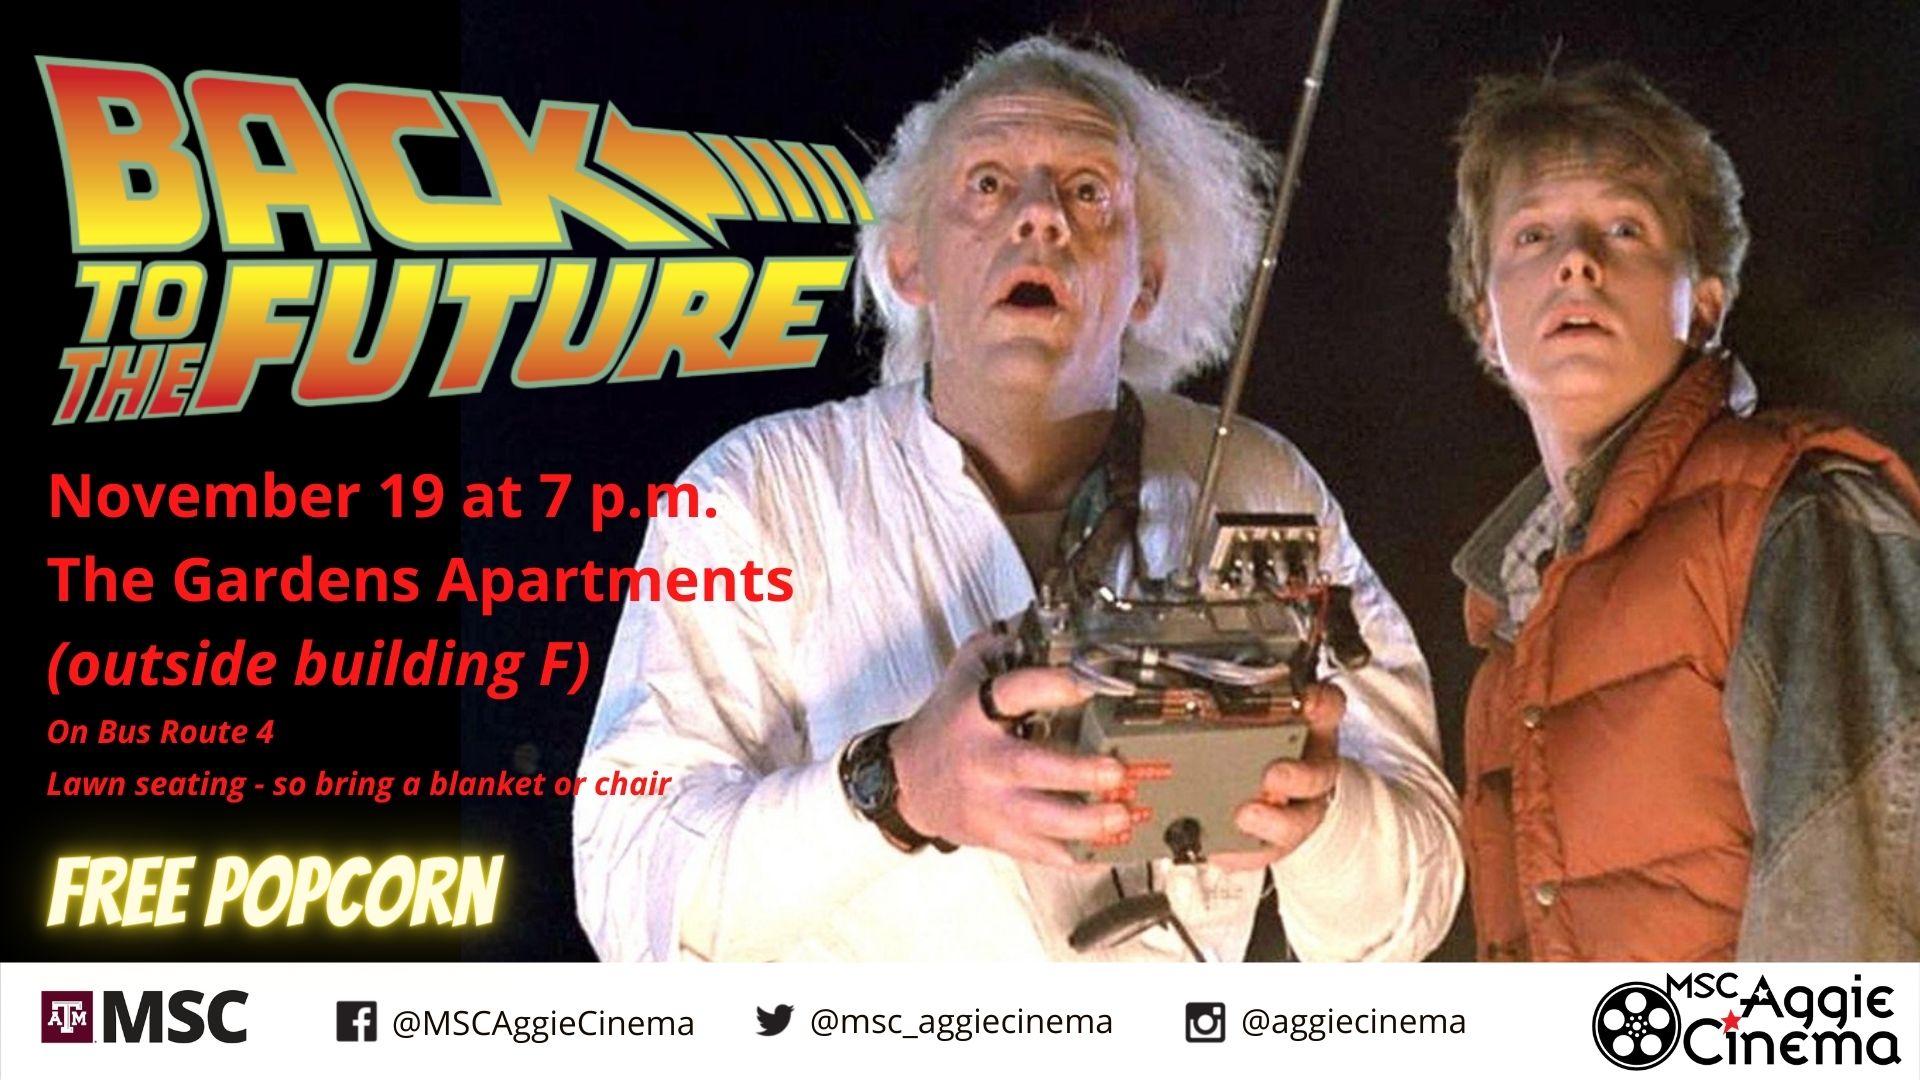 Film still from Back to the Future. MSC Aggie Cinema will host a screening of Back to the Future on November 19 at 7 p.m. at The Gardens Apartments (Outside building F). Take bus route 4 to get to The Gardens Apartments. This screening is outdoors so bring a chair or blanket to sit on. Free popcorn will be served.